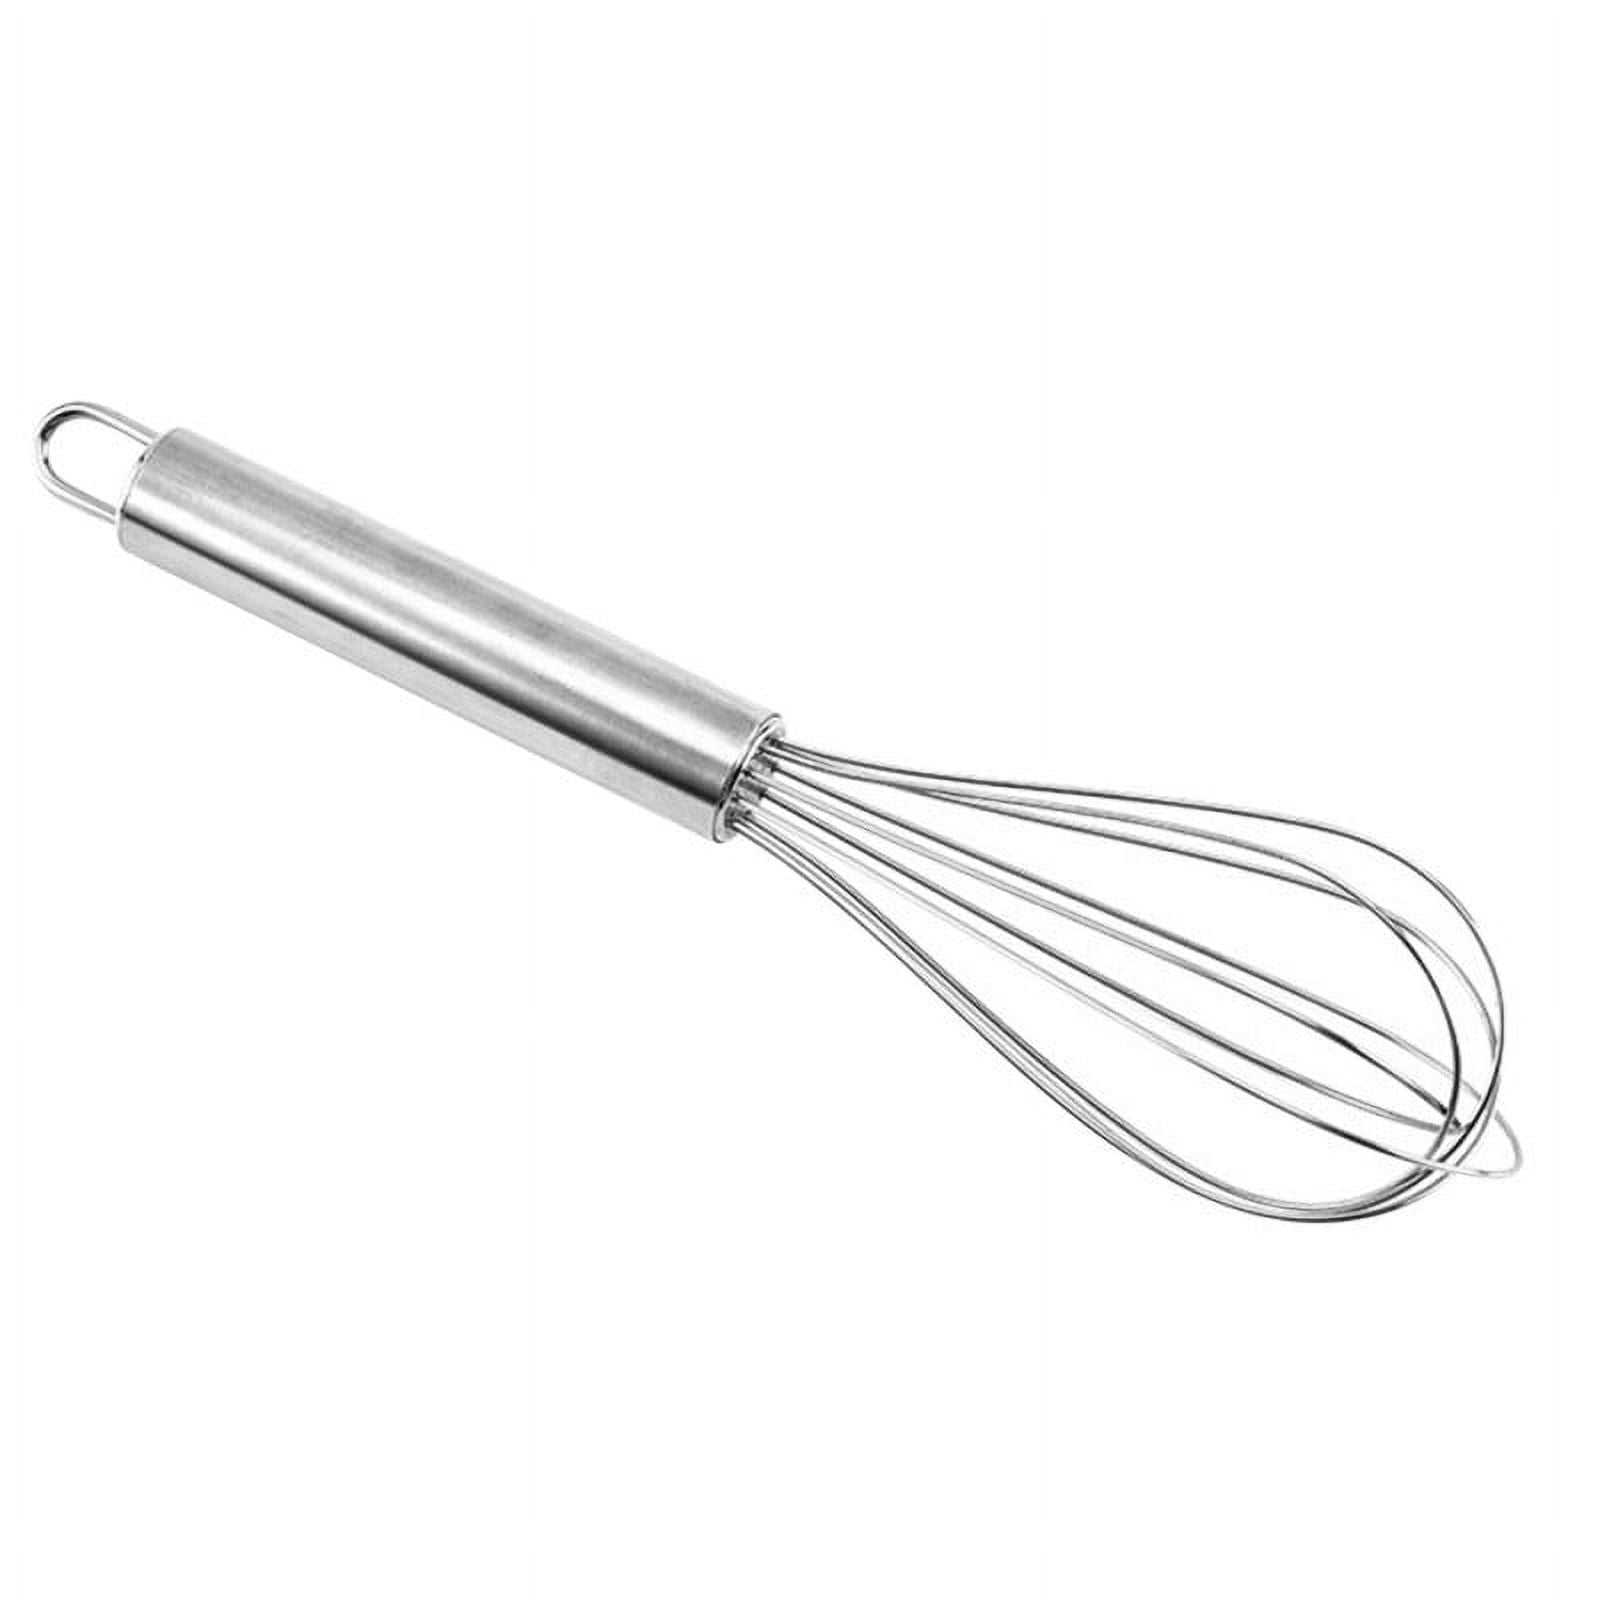 Metal Mini Whisk Stainless Steel Egg Wire Tiny Whisks Cooking Baking,  Professional Whisking Whisker/Wisks/Wisker for Stirring - AliExpress